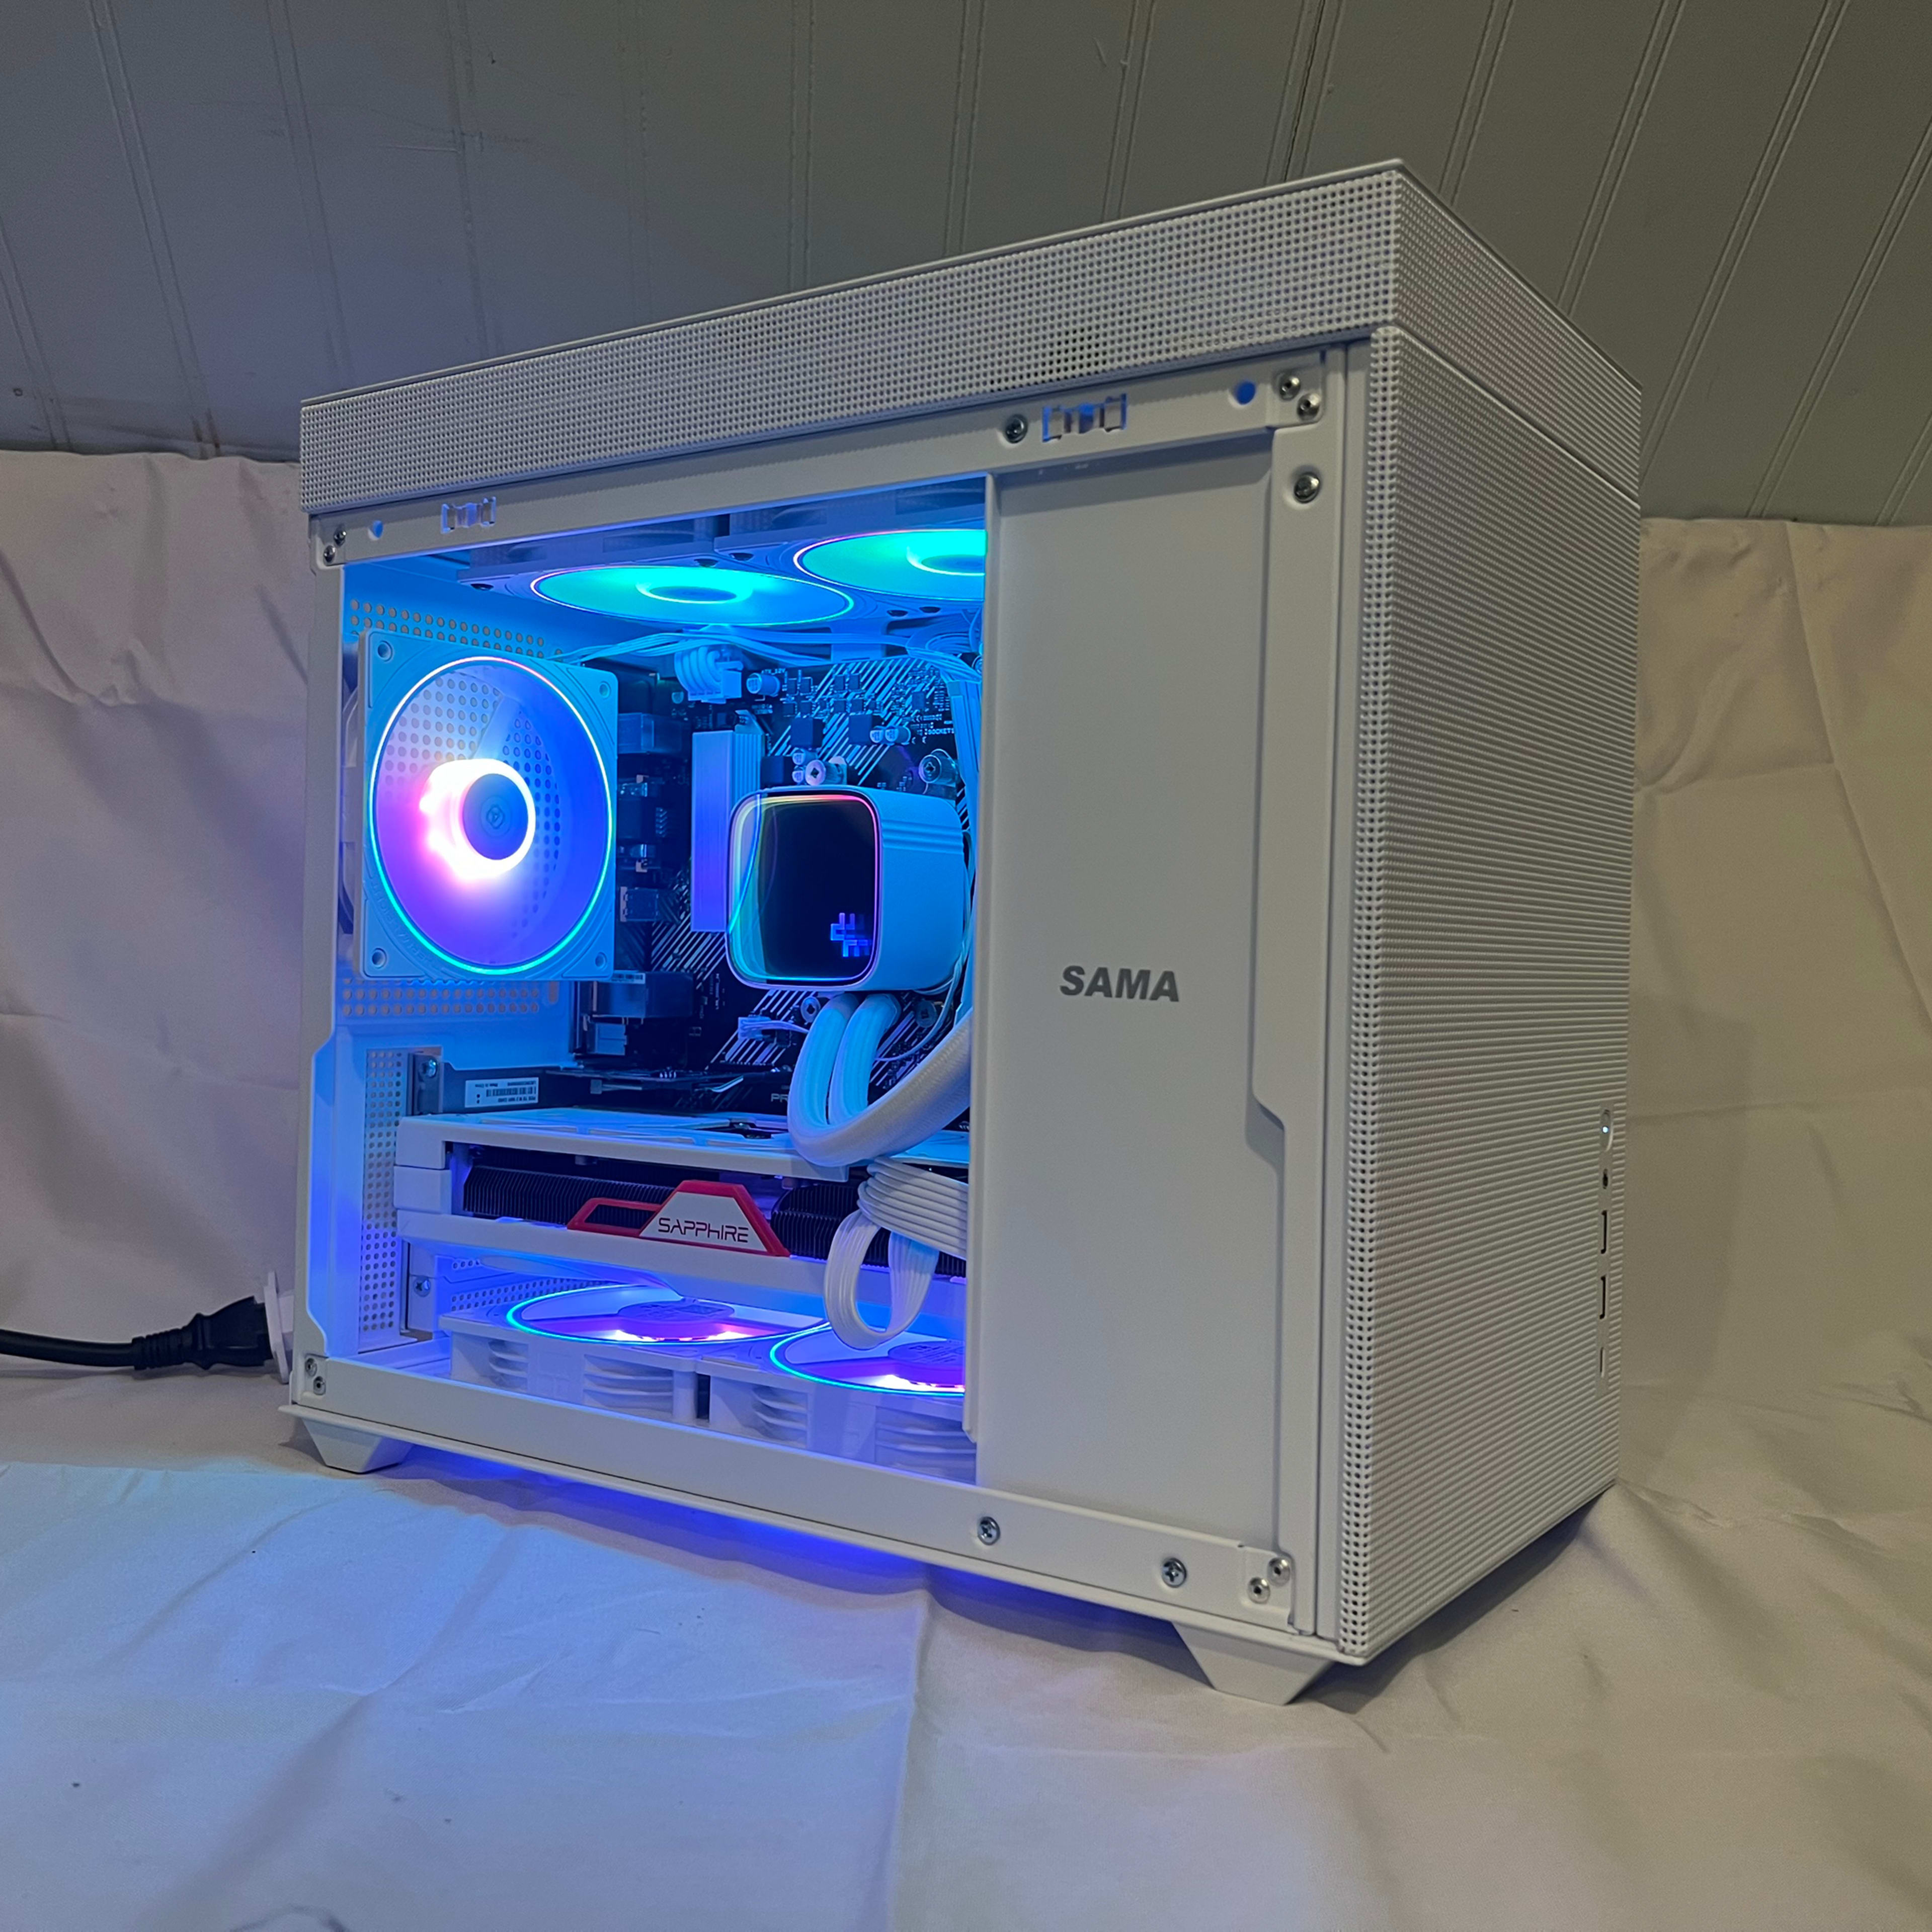 "Northern Lights" 5800x, RX 7800XT, 2tb, white gaming pc with 32gb ram and WI-FI